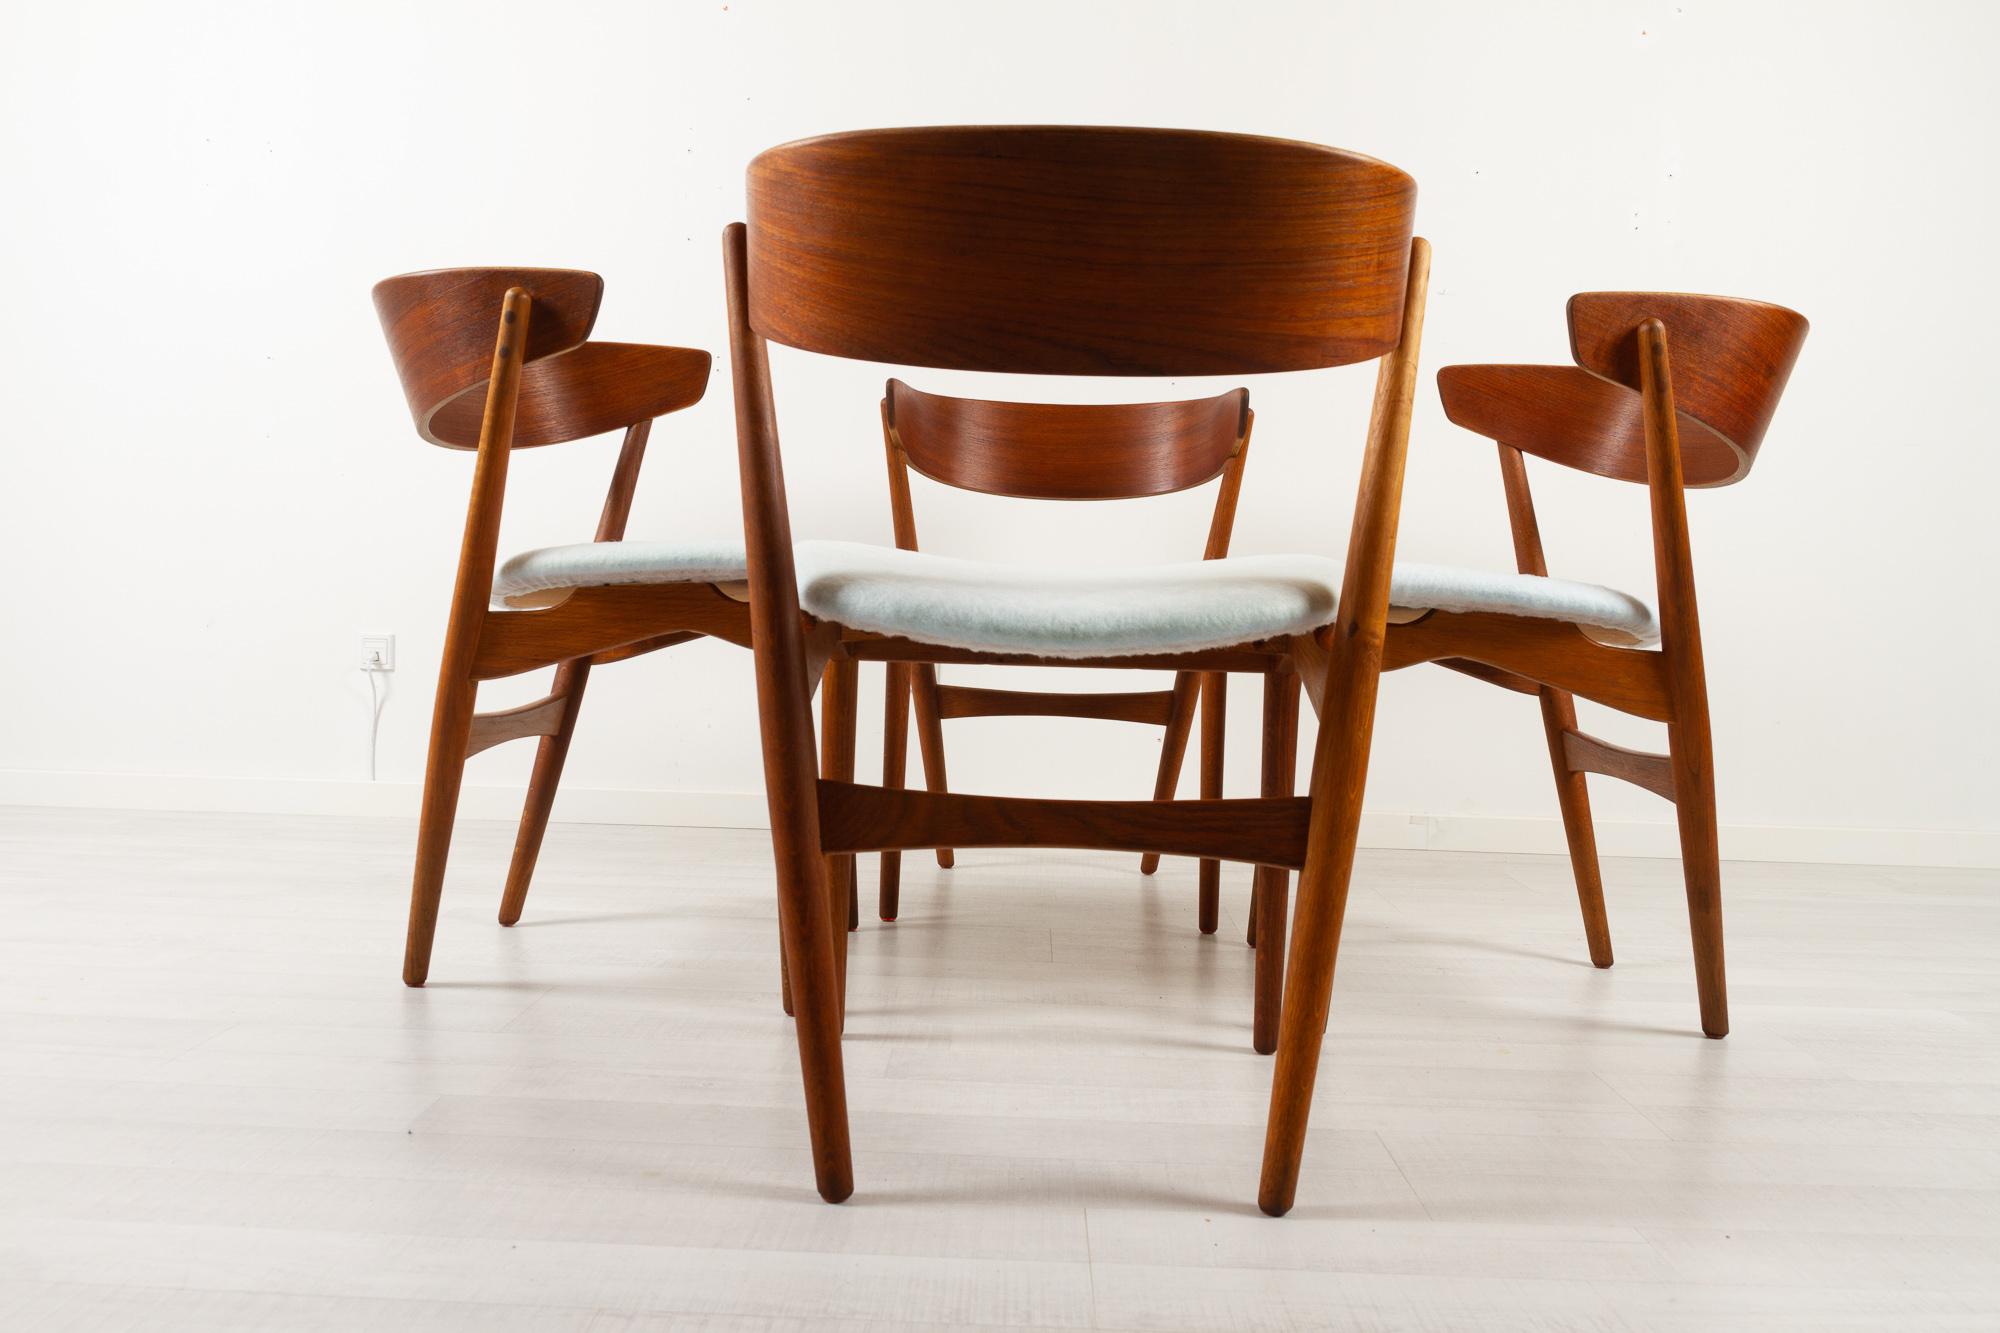 Vintage Danish Teak Dining Chairs No. 7 by Helge Sibast 1960s Set of 4 For Sale 3